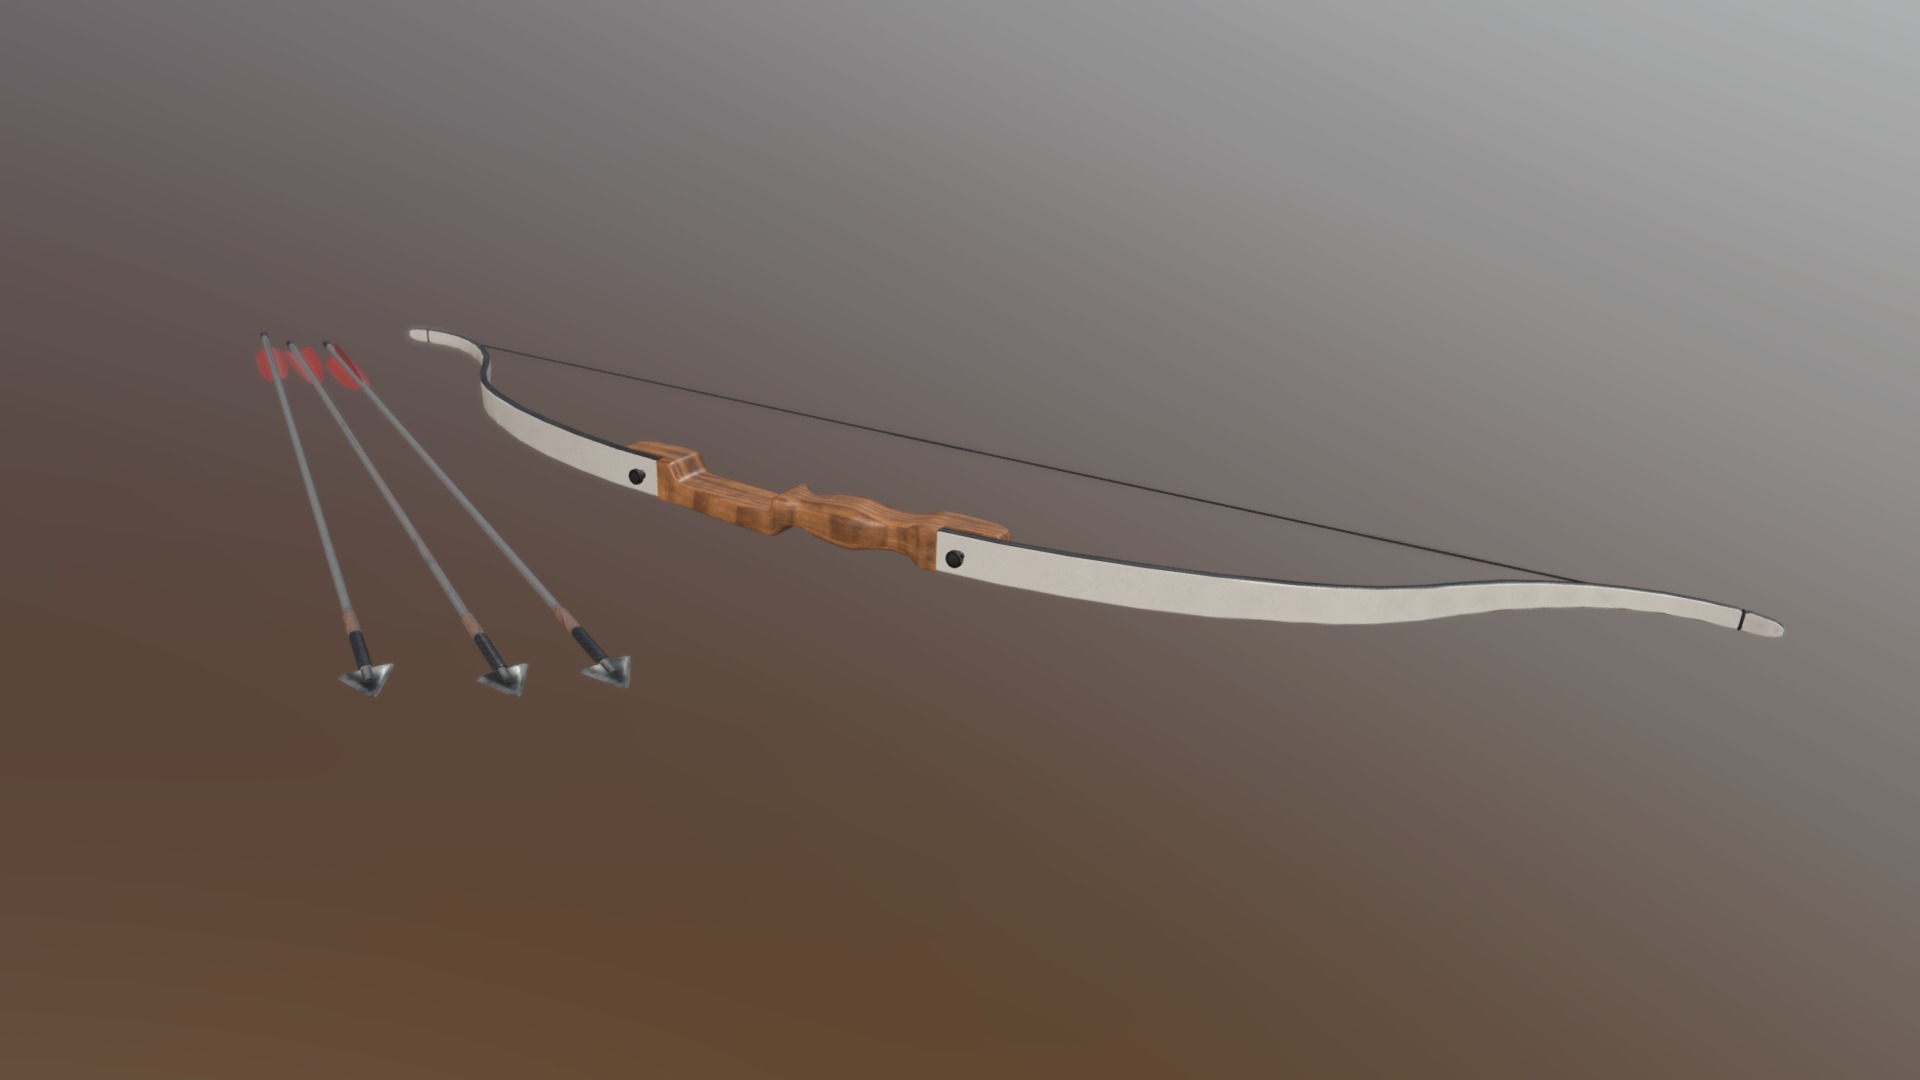 Recurve bow with improvised broadhead arrows.

Mod made for Left 4 Dead 2

Workshop page:
http://steamcommunity.com/sharedfiles/filedetails/?id=1077649911 - Recurve Bow - Download Free 3D model by Rectus 3d model